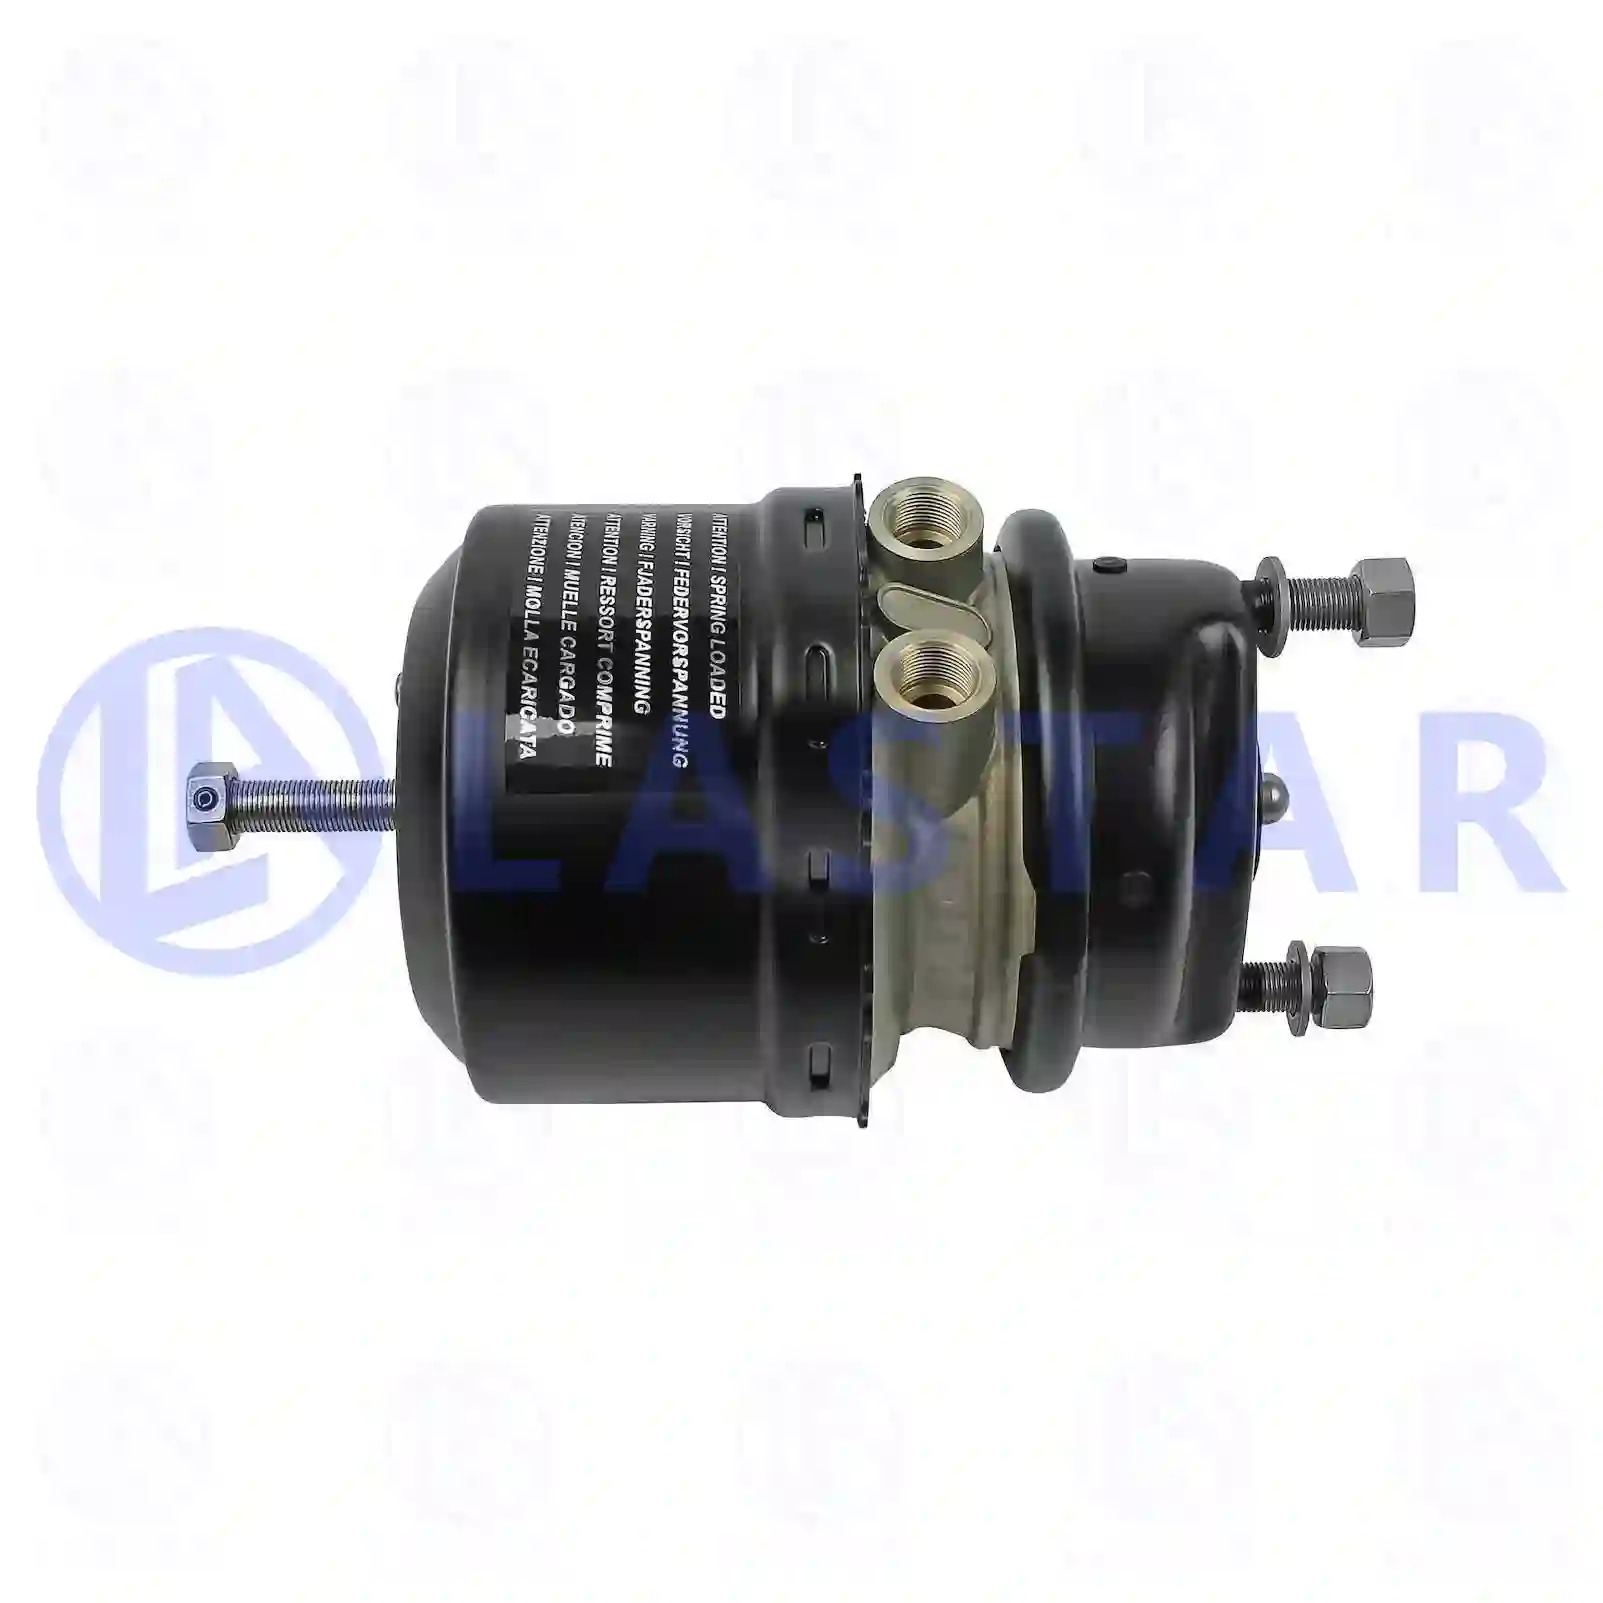 Spring brake cylinder, right, 77714171, 0154206318, 0154208118, 0194205918, 0204206018, ||  77714171 Lastar Spare Part | Truck Spare Parts, Auotomotive Spare Parts Spring brake cylinder, right, 77714171, 0154206318, 0154208118, 0194205918, 0204206018, ||  77714171 Lastar Spare Part | Truck Spare Parts, Auotomotive Spare Parts